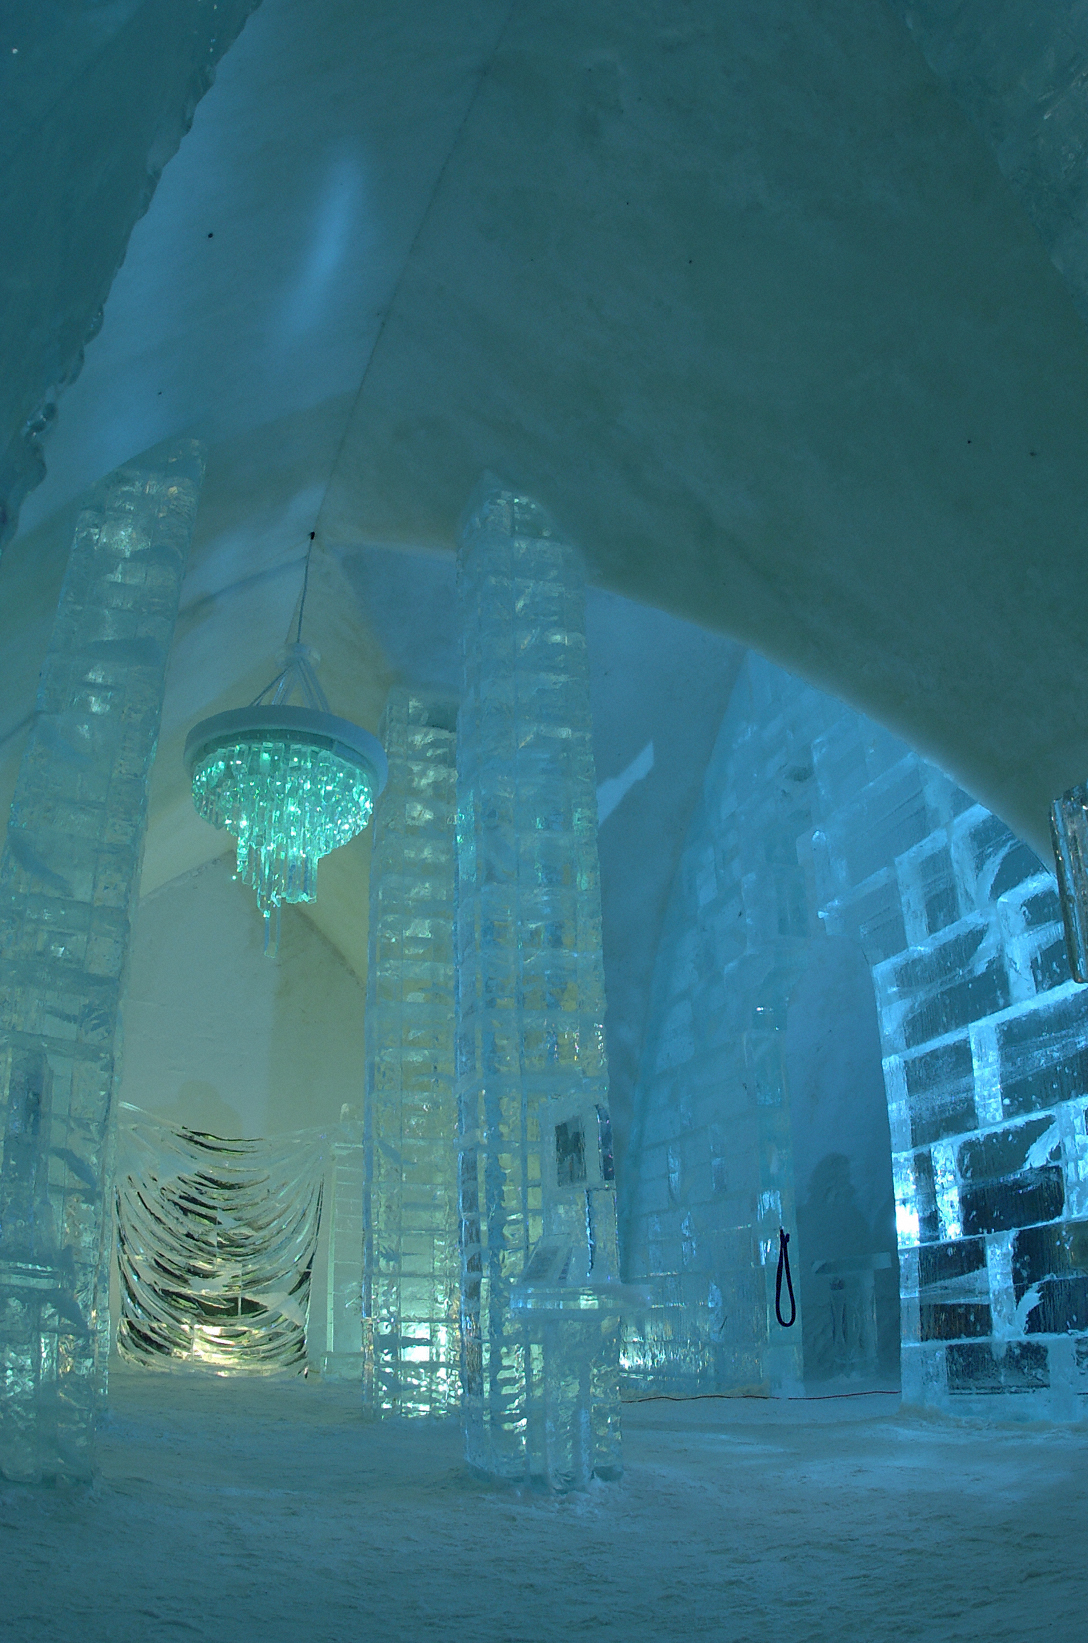 Ice Hotel Quebec-Canada to Celebrate Fifth Anniversary in 2005